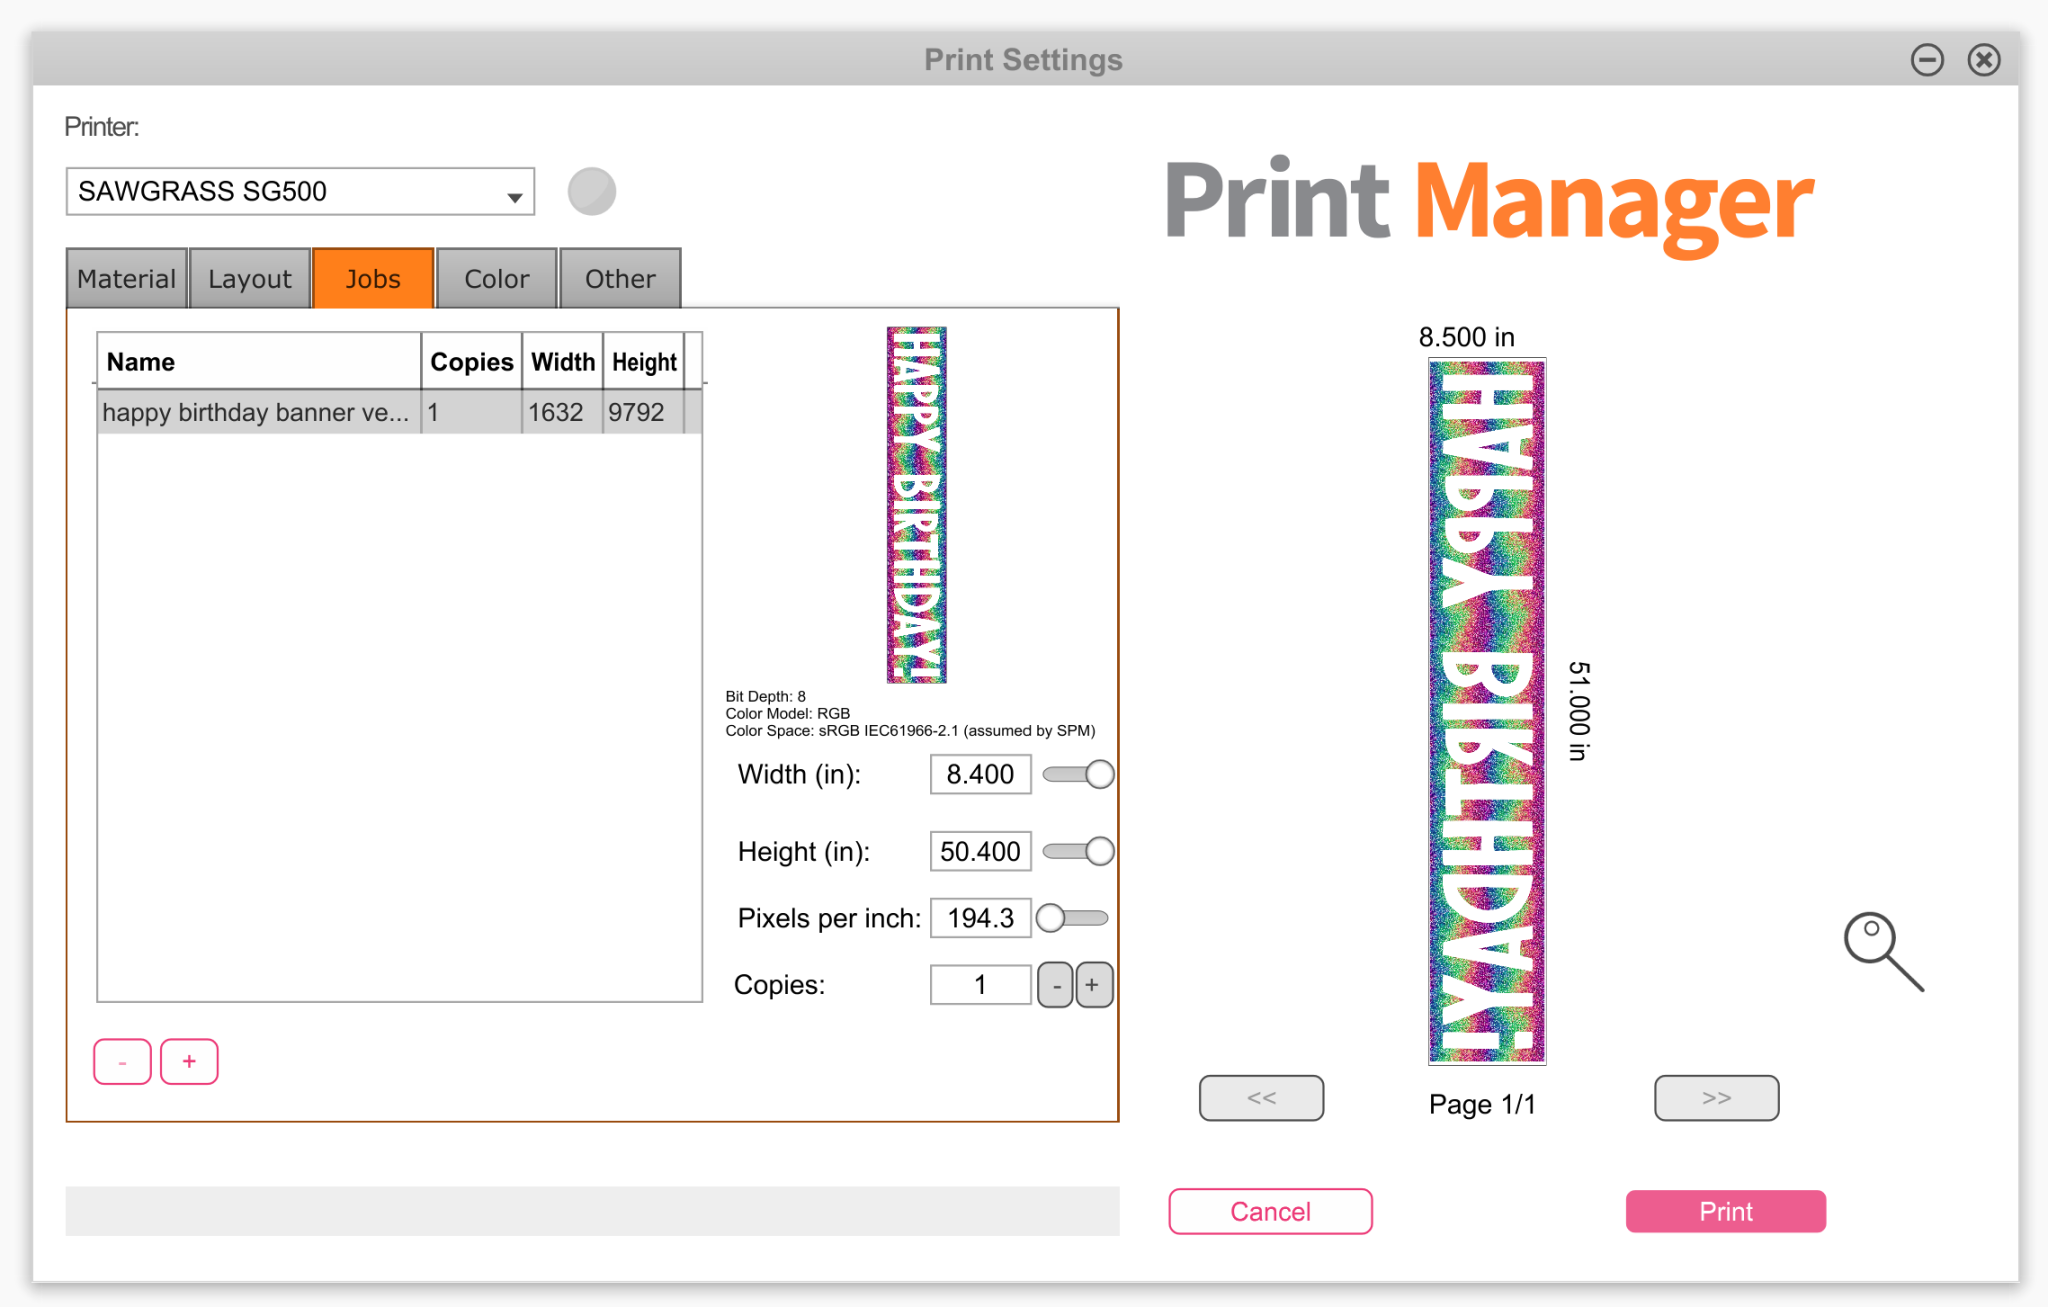 print manager ready for printing to bypass tray